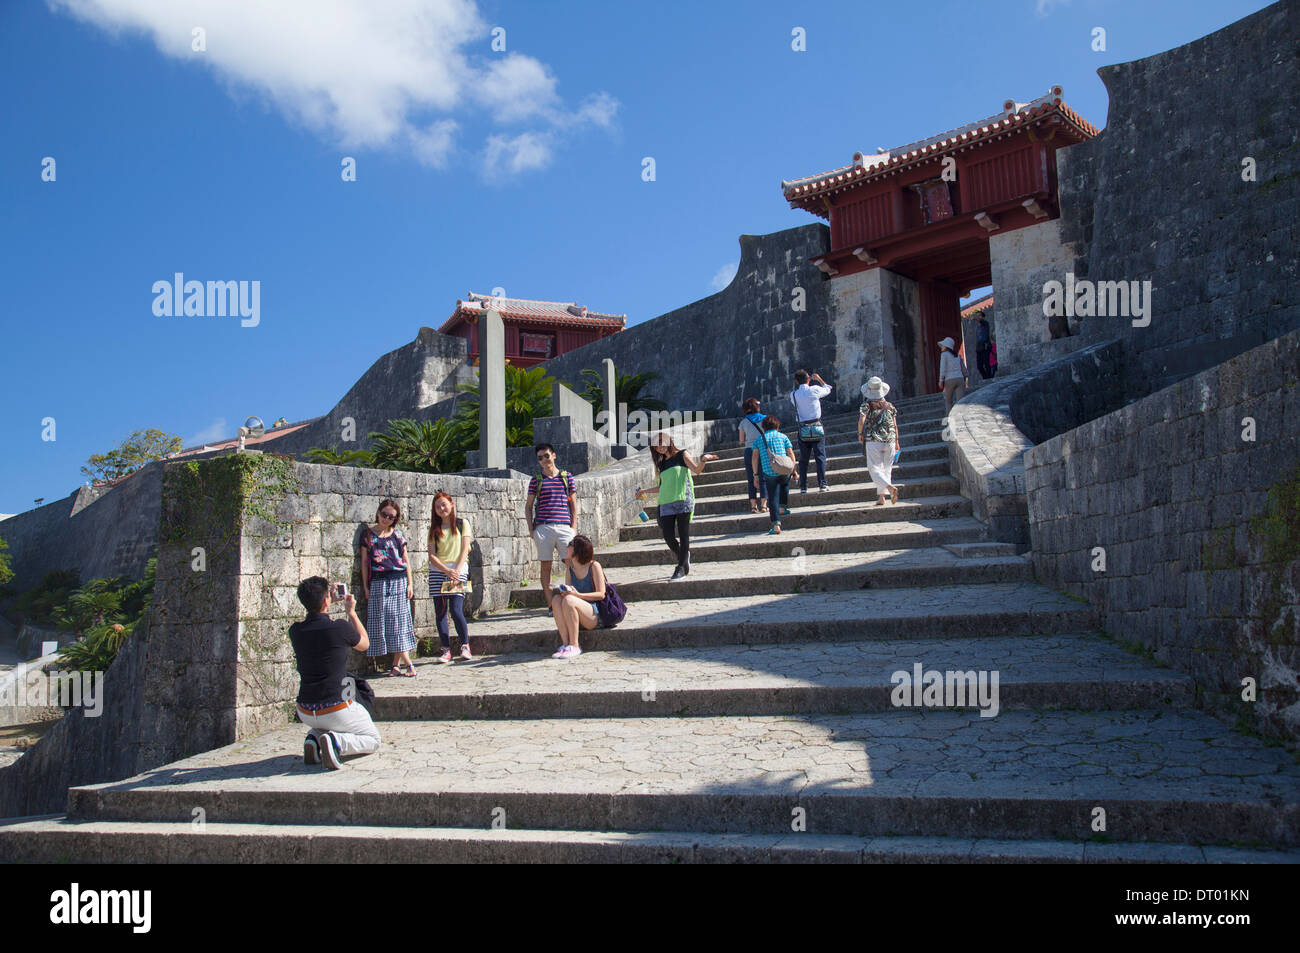 Tourists in front of gate at Shuri Castle (UNESCO World Heritage Site), Naha, Okinawa, Japan Stock Photo